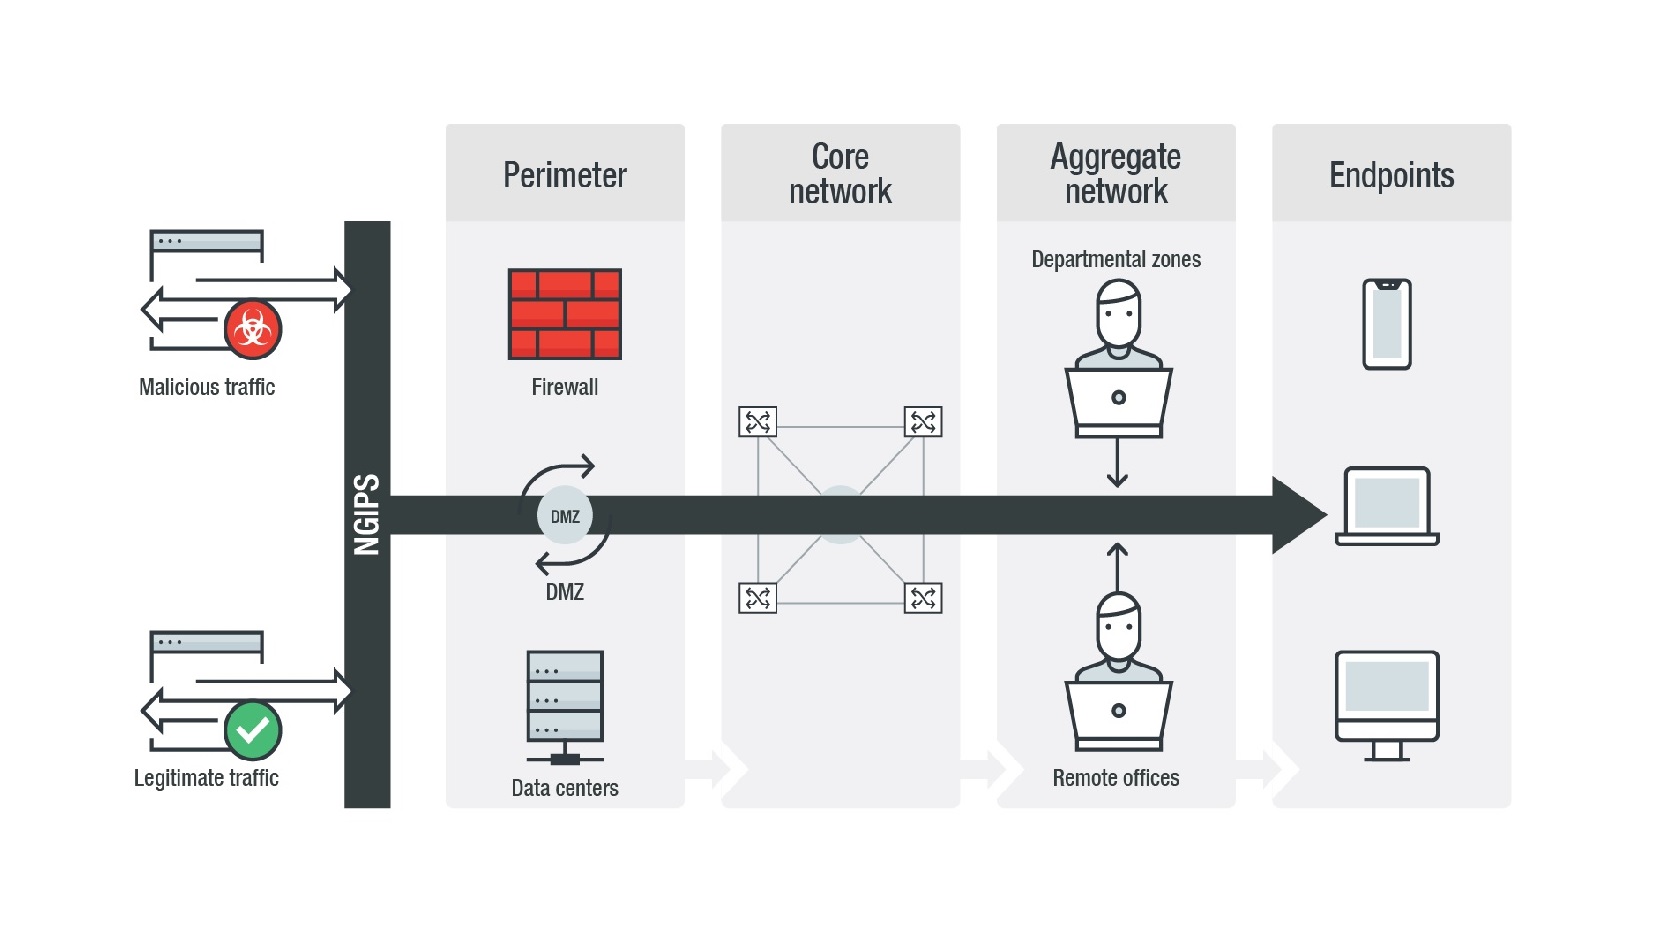 Guide To Network Threats Strengthening Network Perimeter Defenses With Next Generation Intrusion Prevention Security News